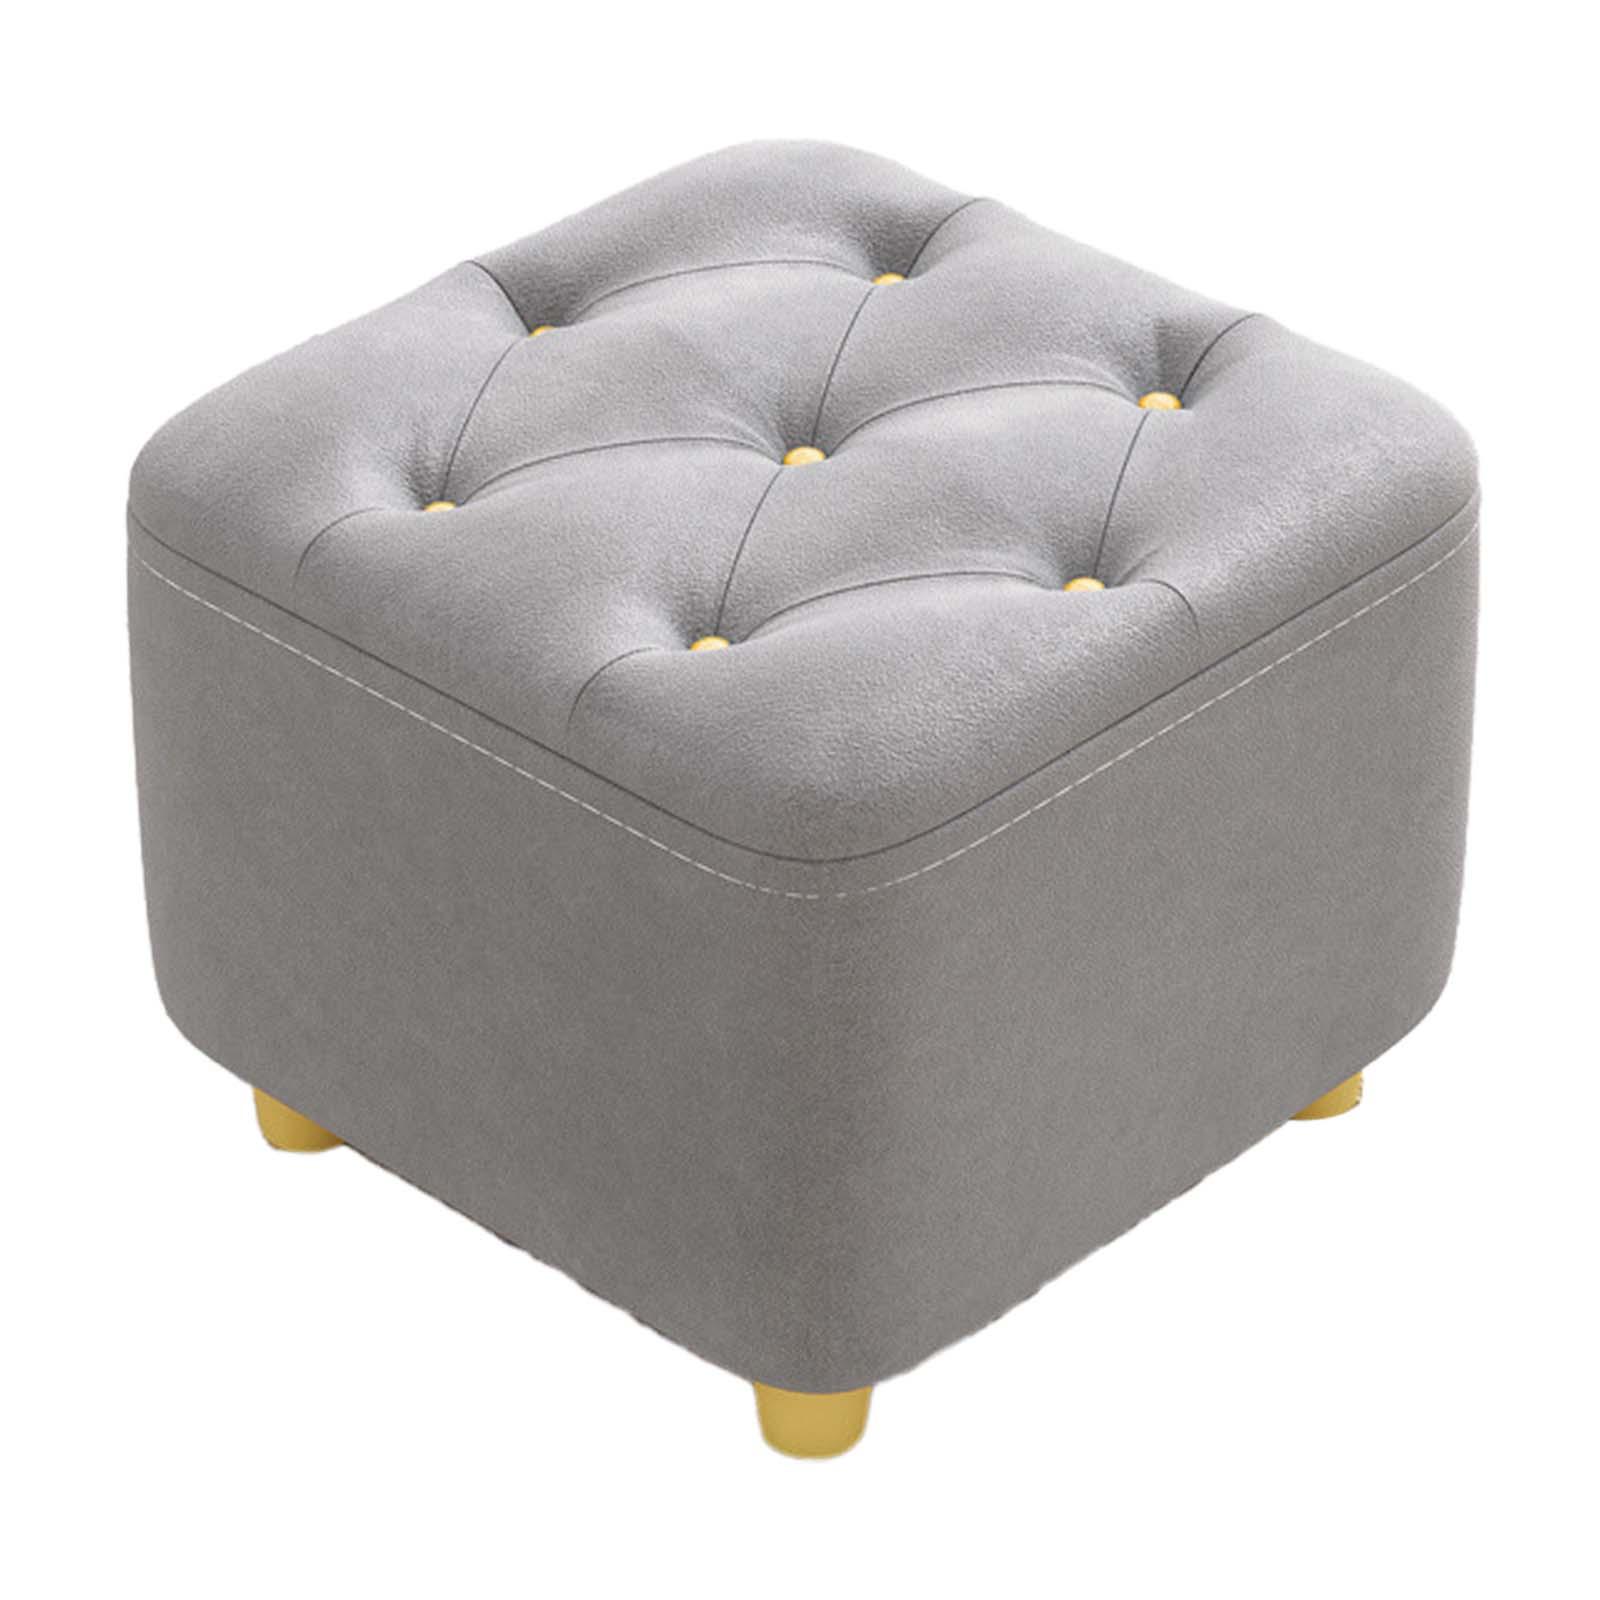 Square Footstool Foot Stool Comfortable Stepstool Creative Ottoman Stool Footrest for Living Room Dressing Room Bedroom Couch gray - image 4 of 8